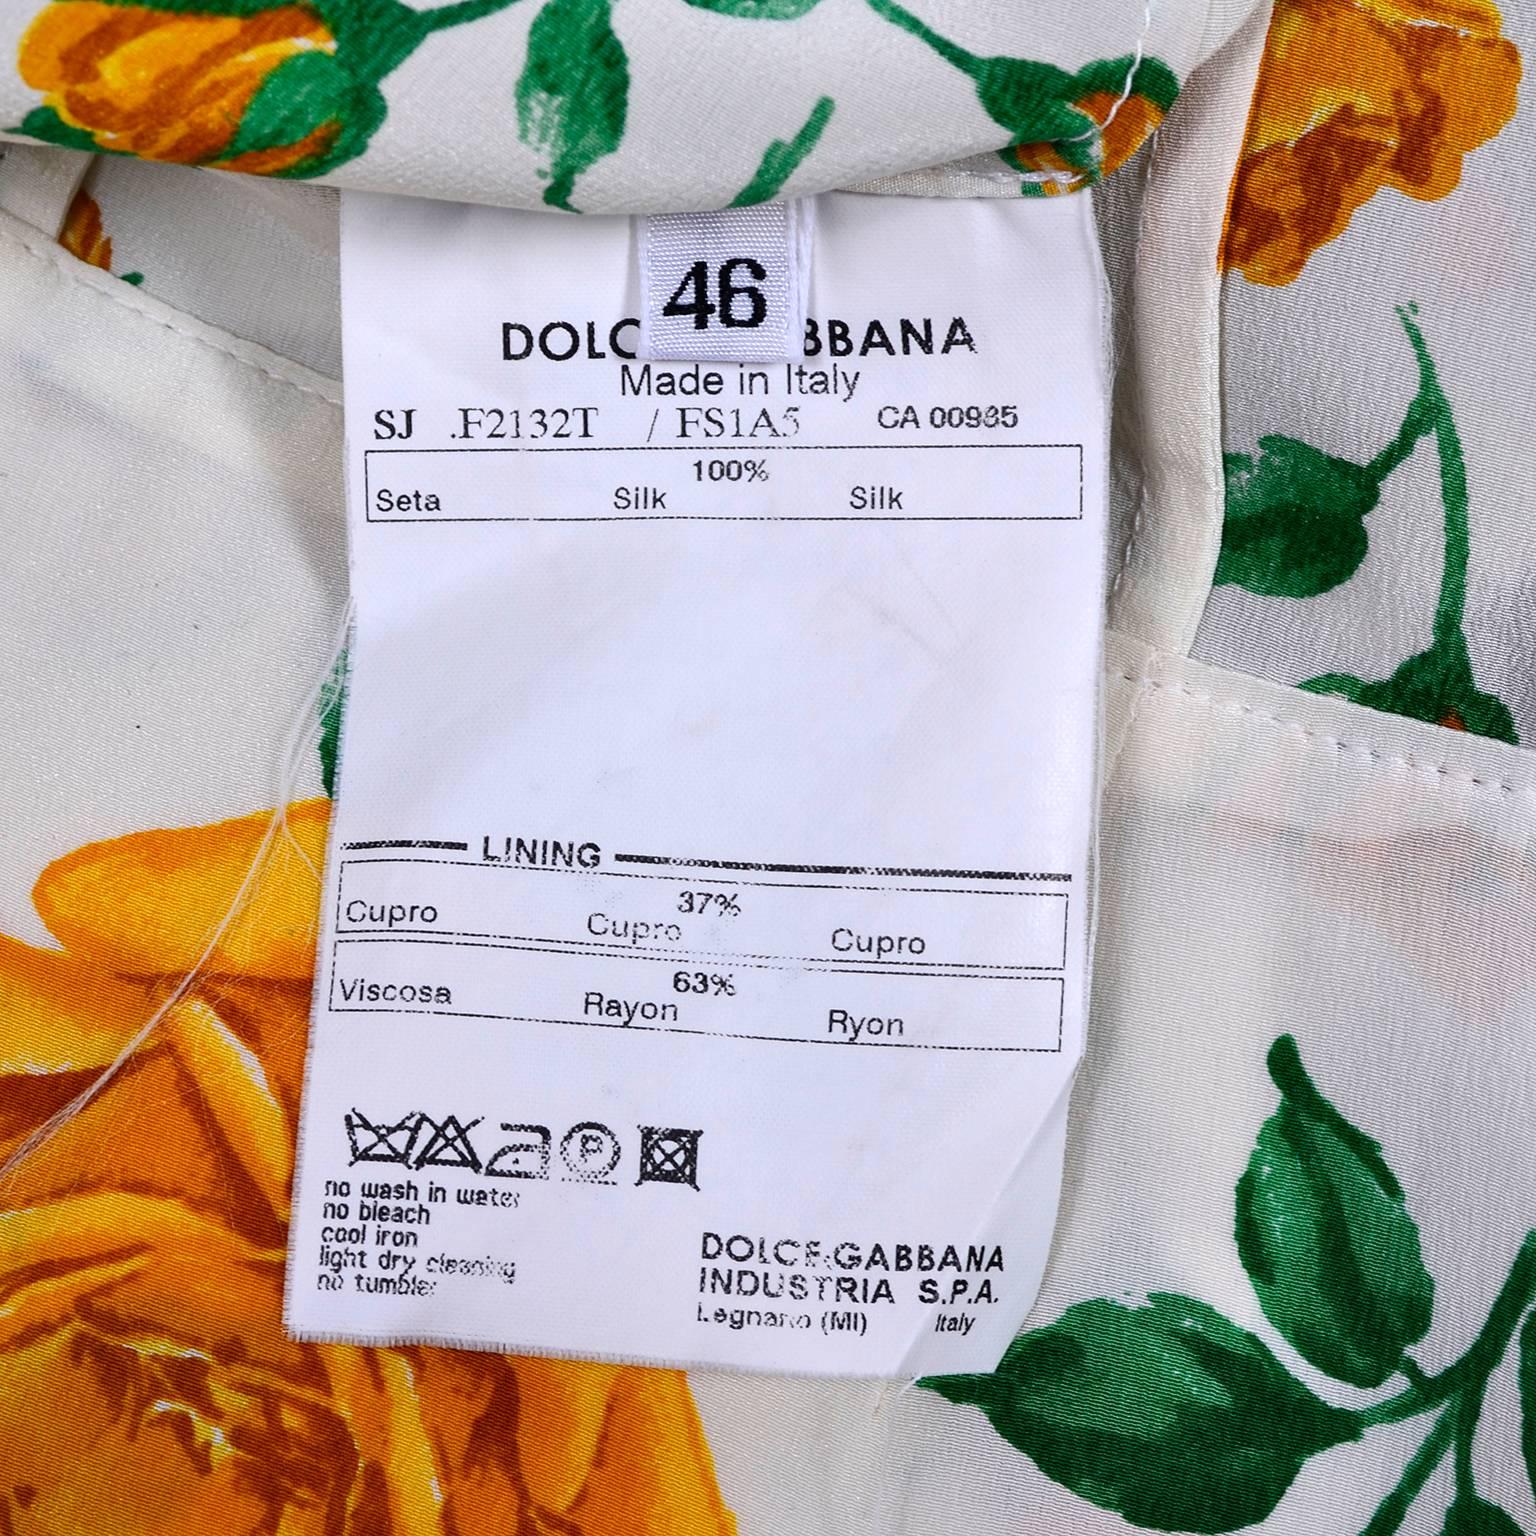 Dolce & Gabbana Dress 2pc Skirt & Blouse in Yellow Rose Floral Print & Lace Trim 2